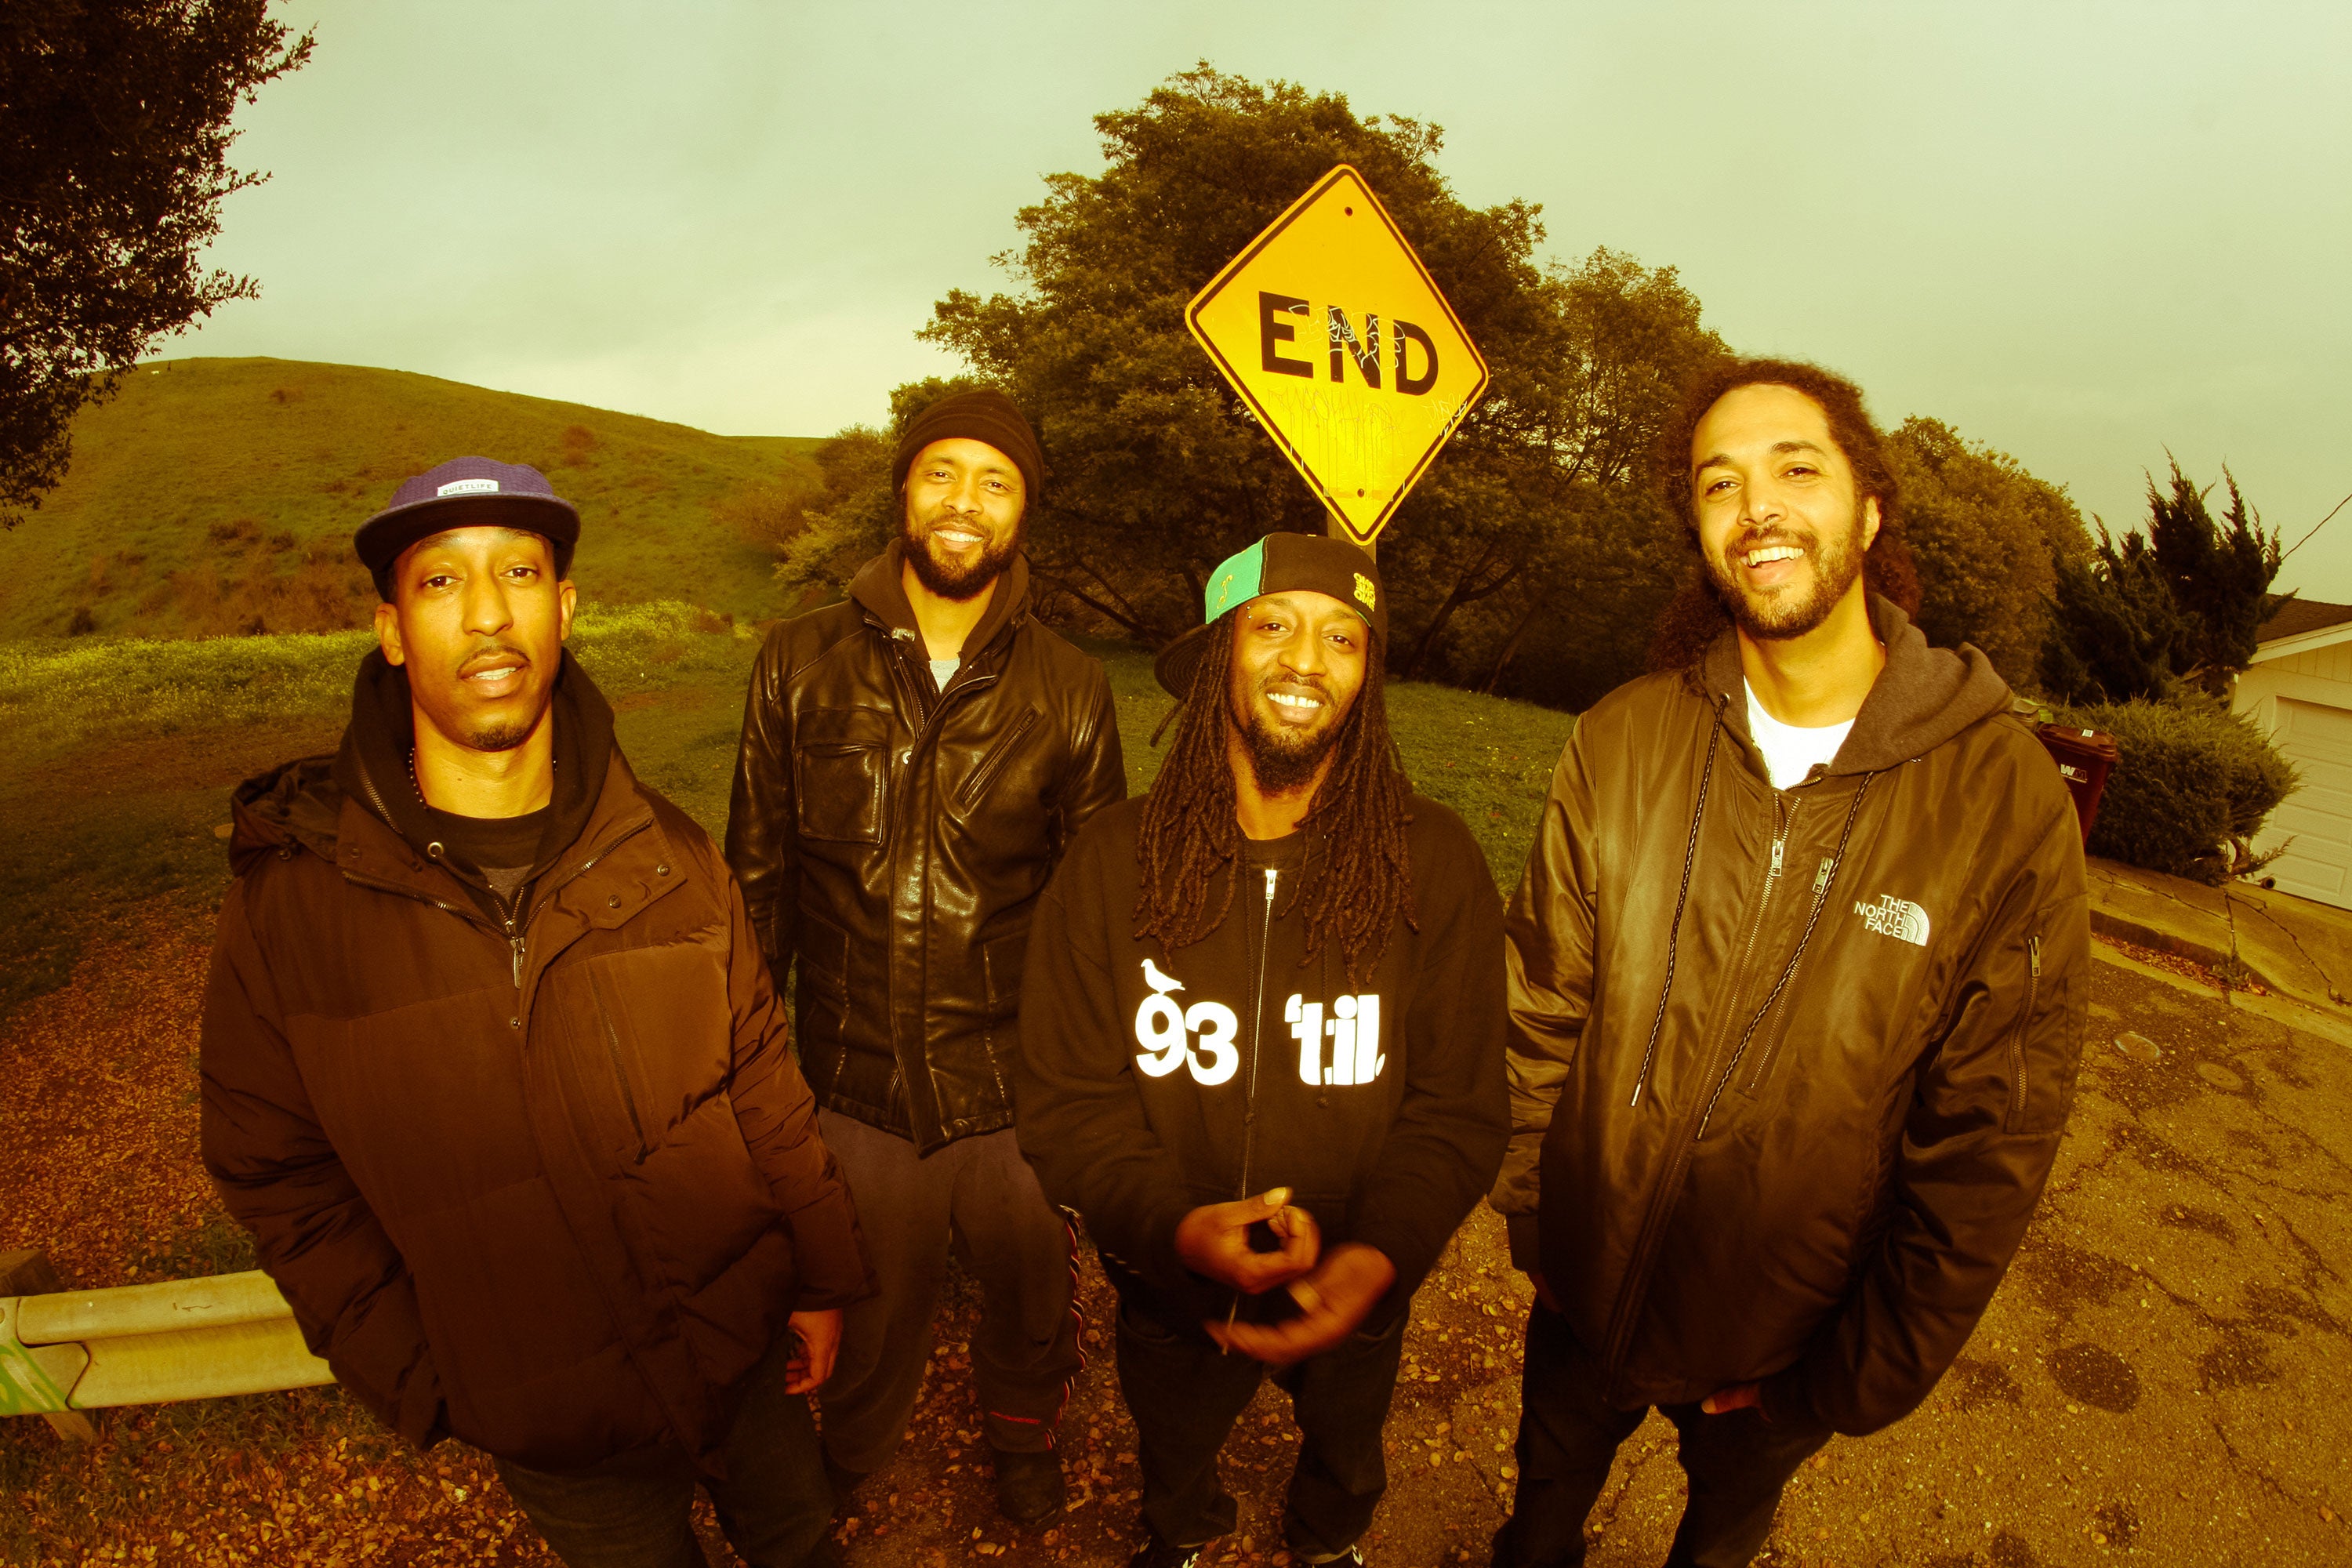 Souls of Mischief: The 30th Anniversary Tour @ 191 Toole